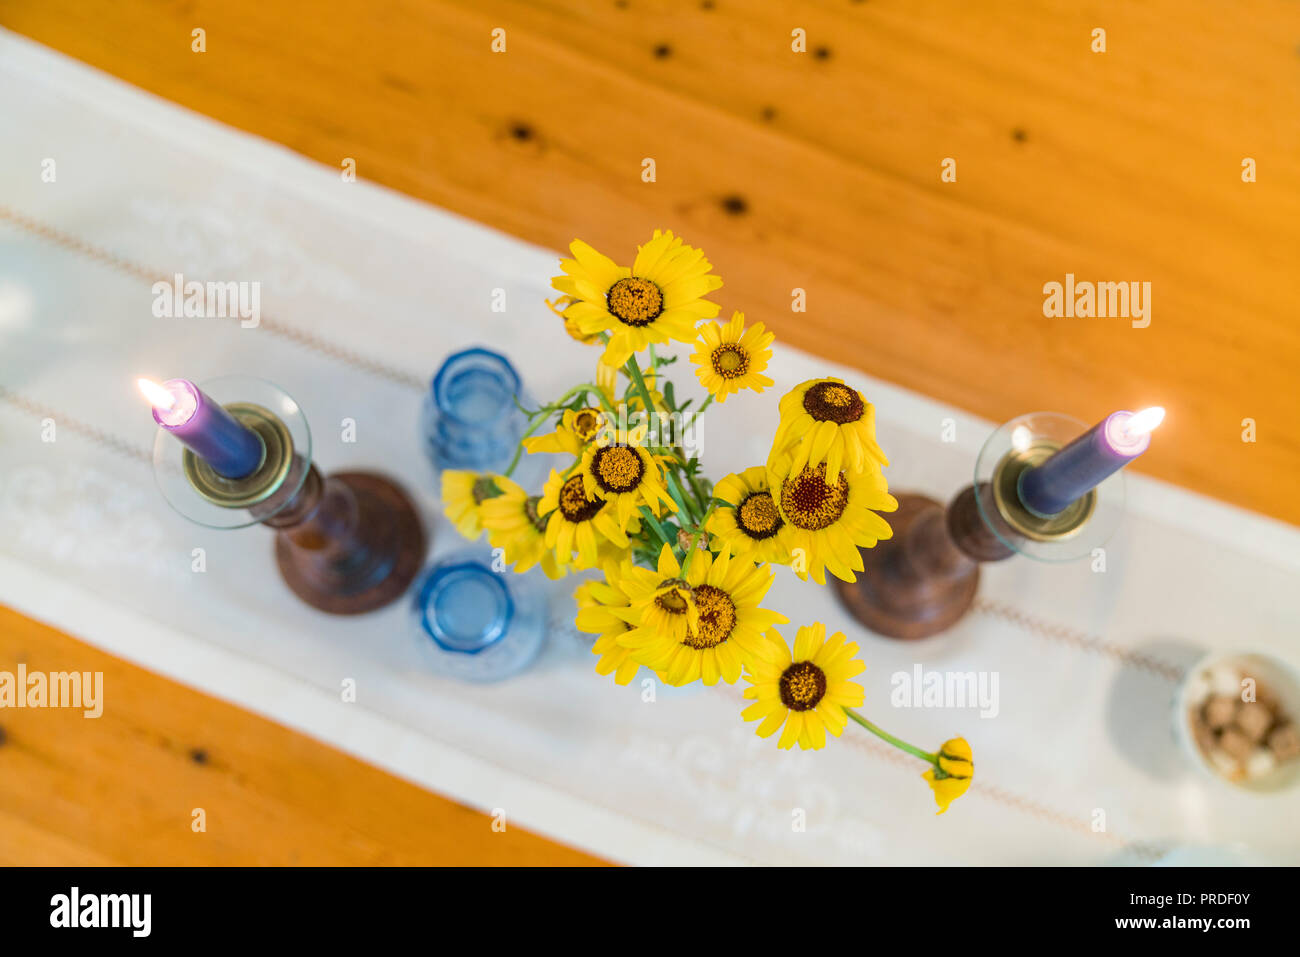 Table decoration with flowers and candles. Stock Photo